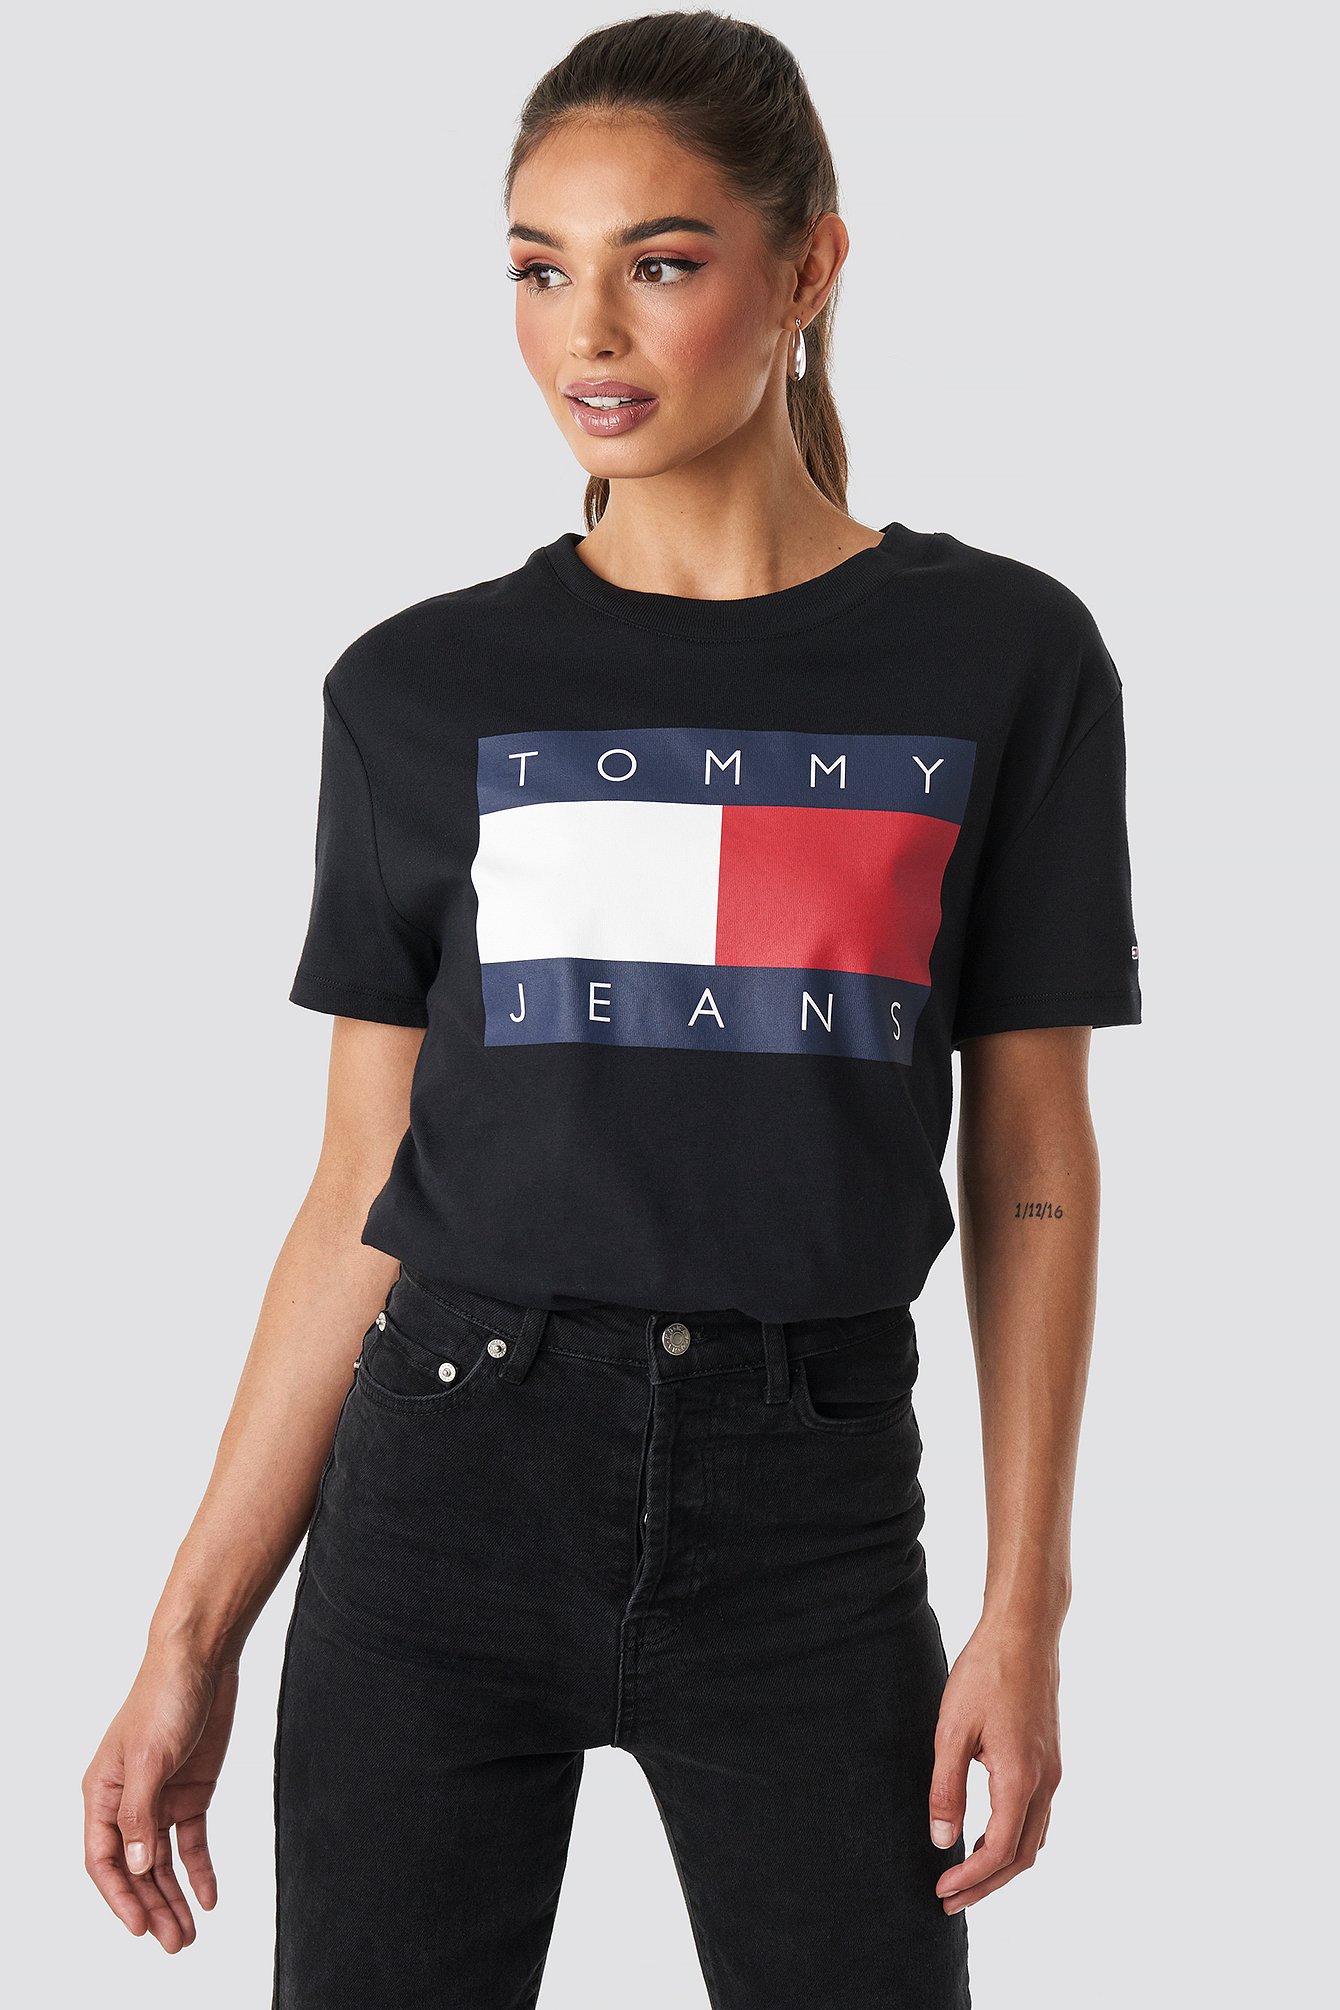 tee tommy